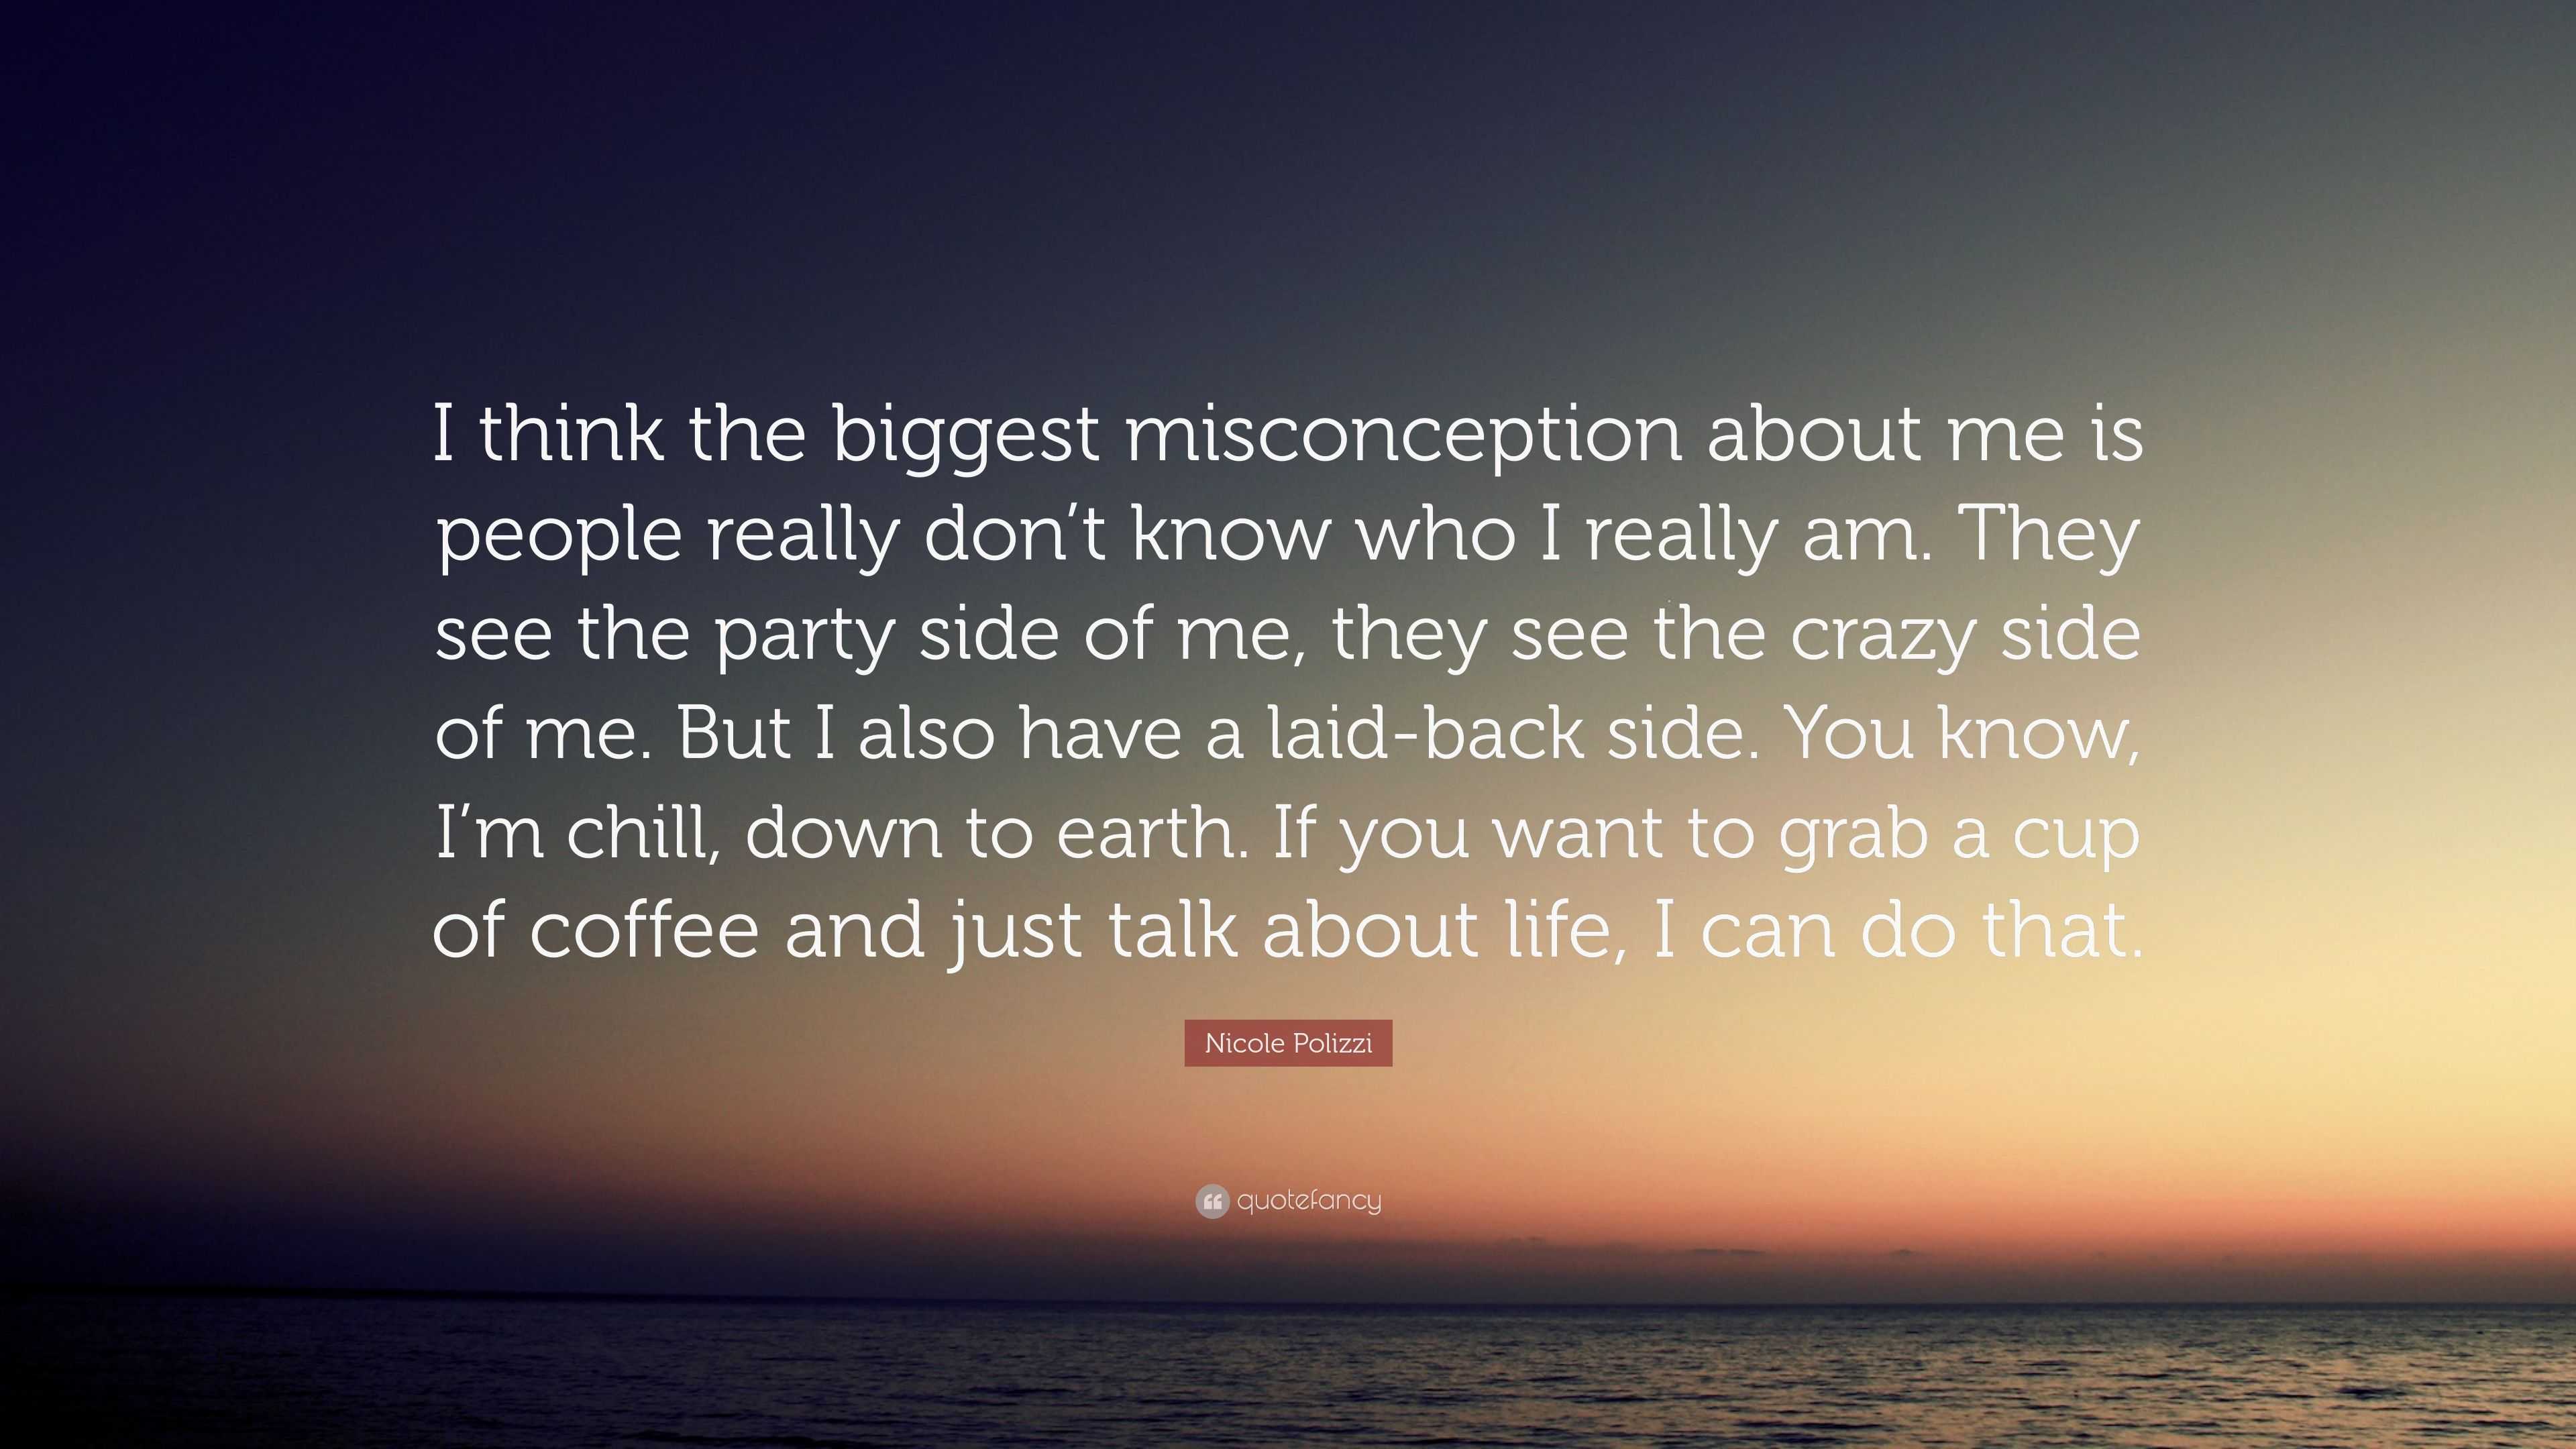 Nicole Polizzi Quote “I think the biggest misconception about me is